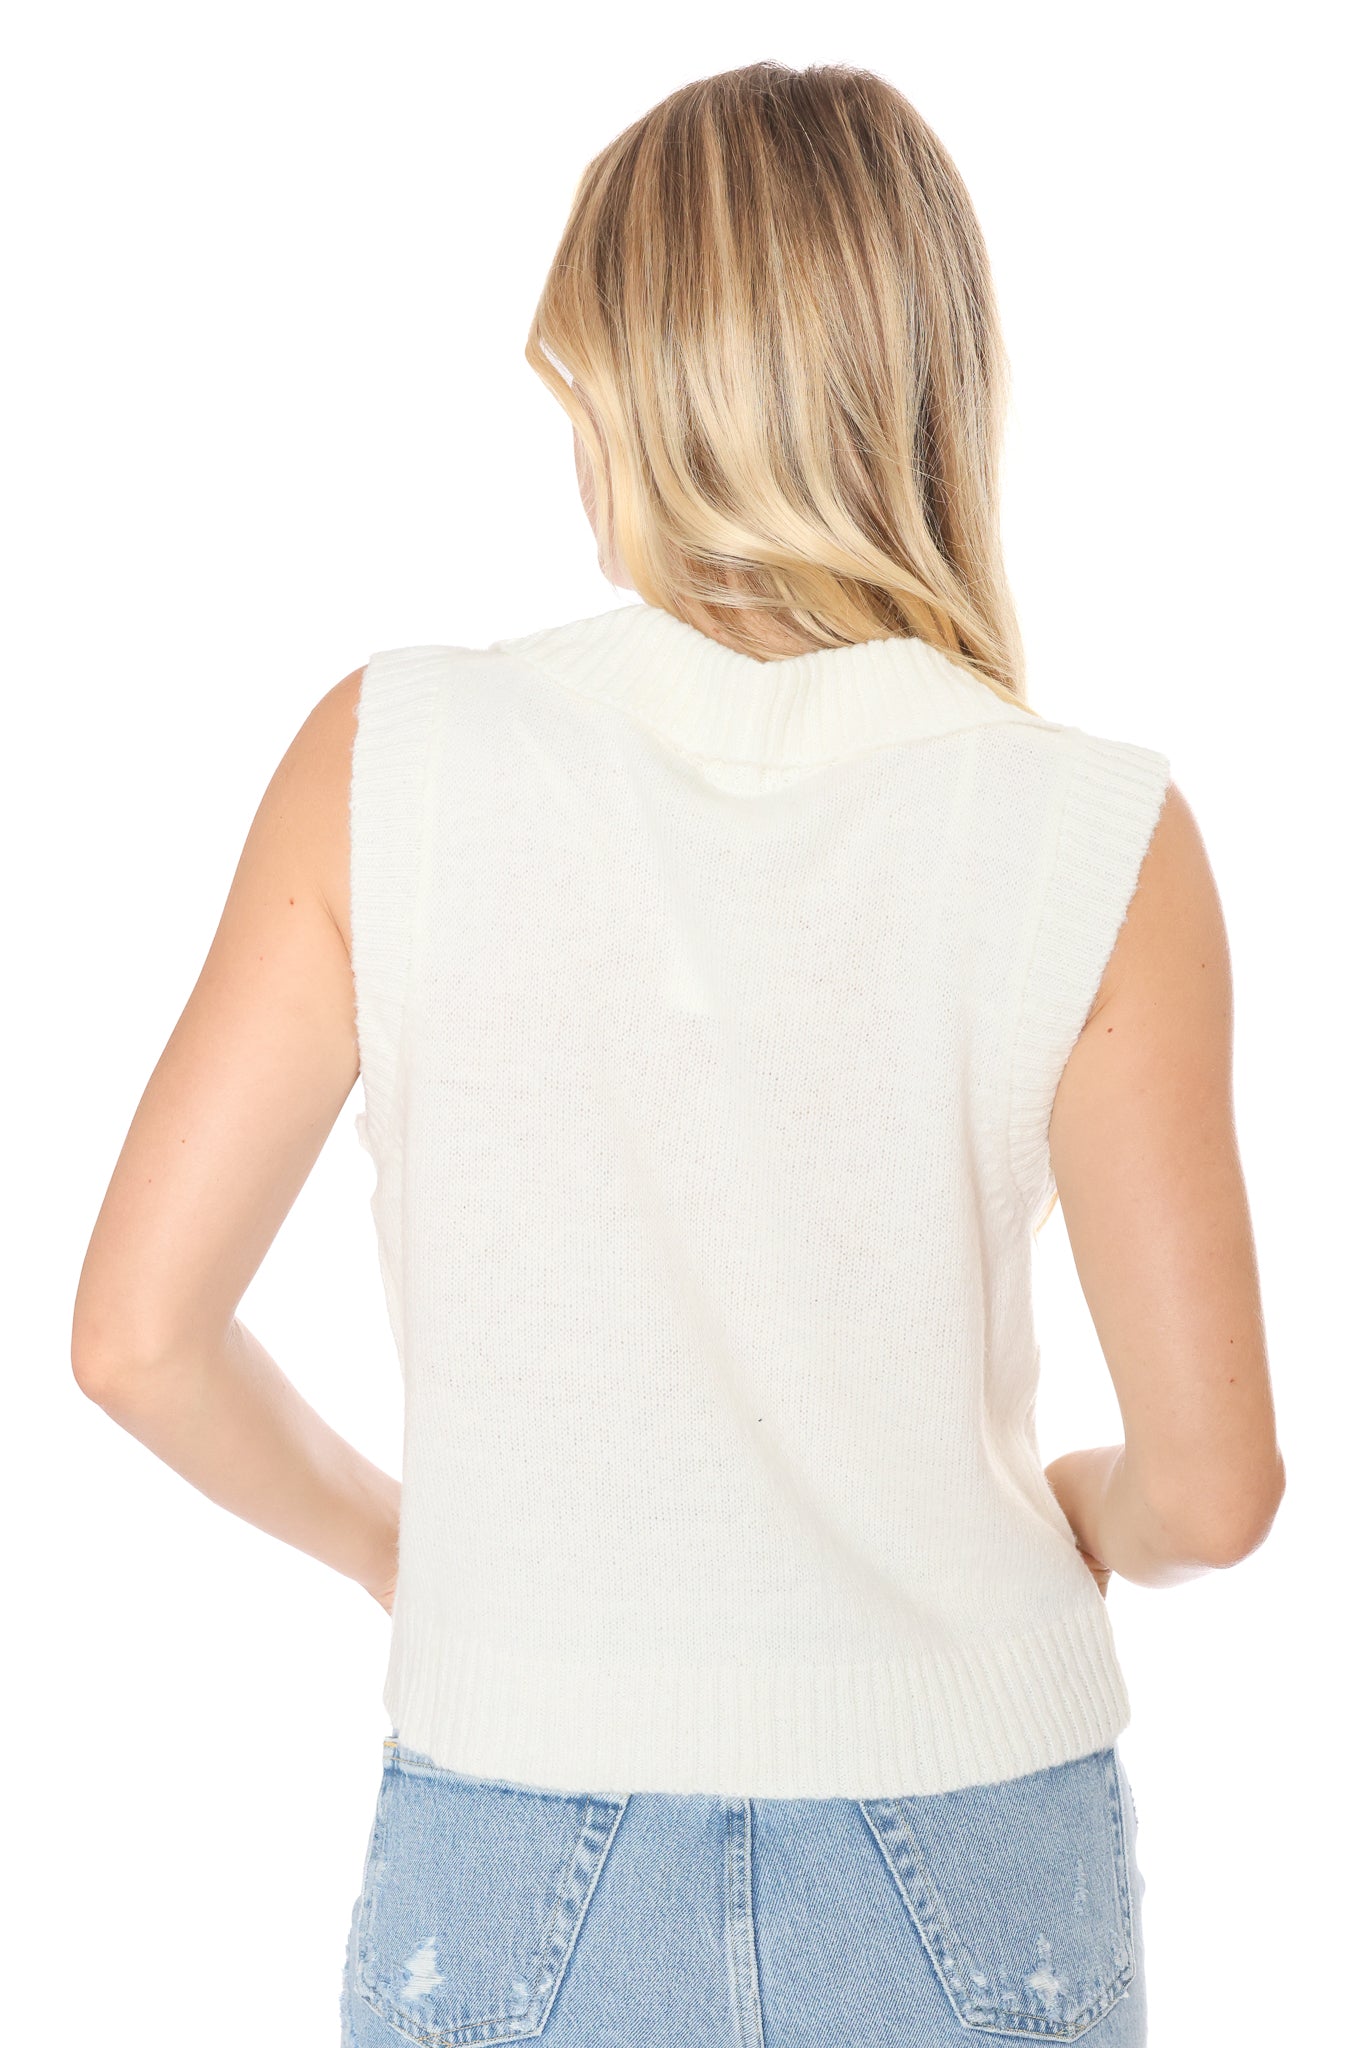 Harper Knitted Vest by Common Collection